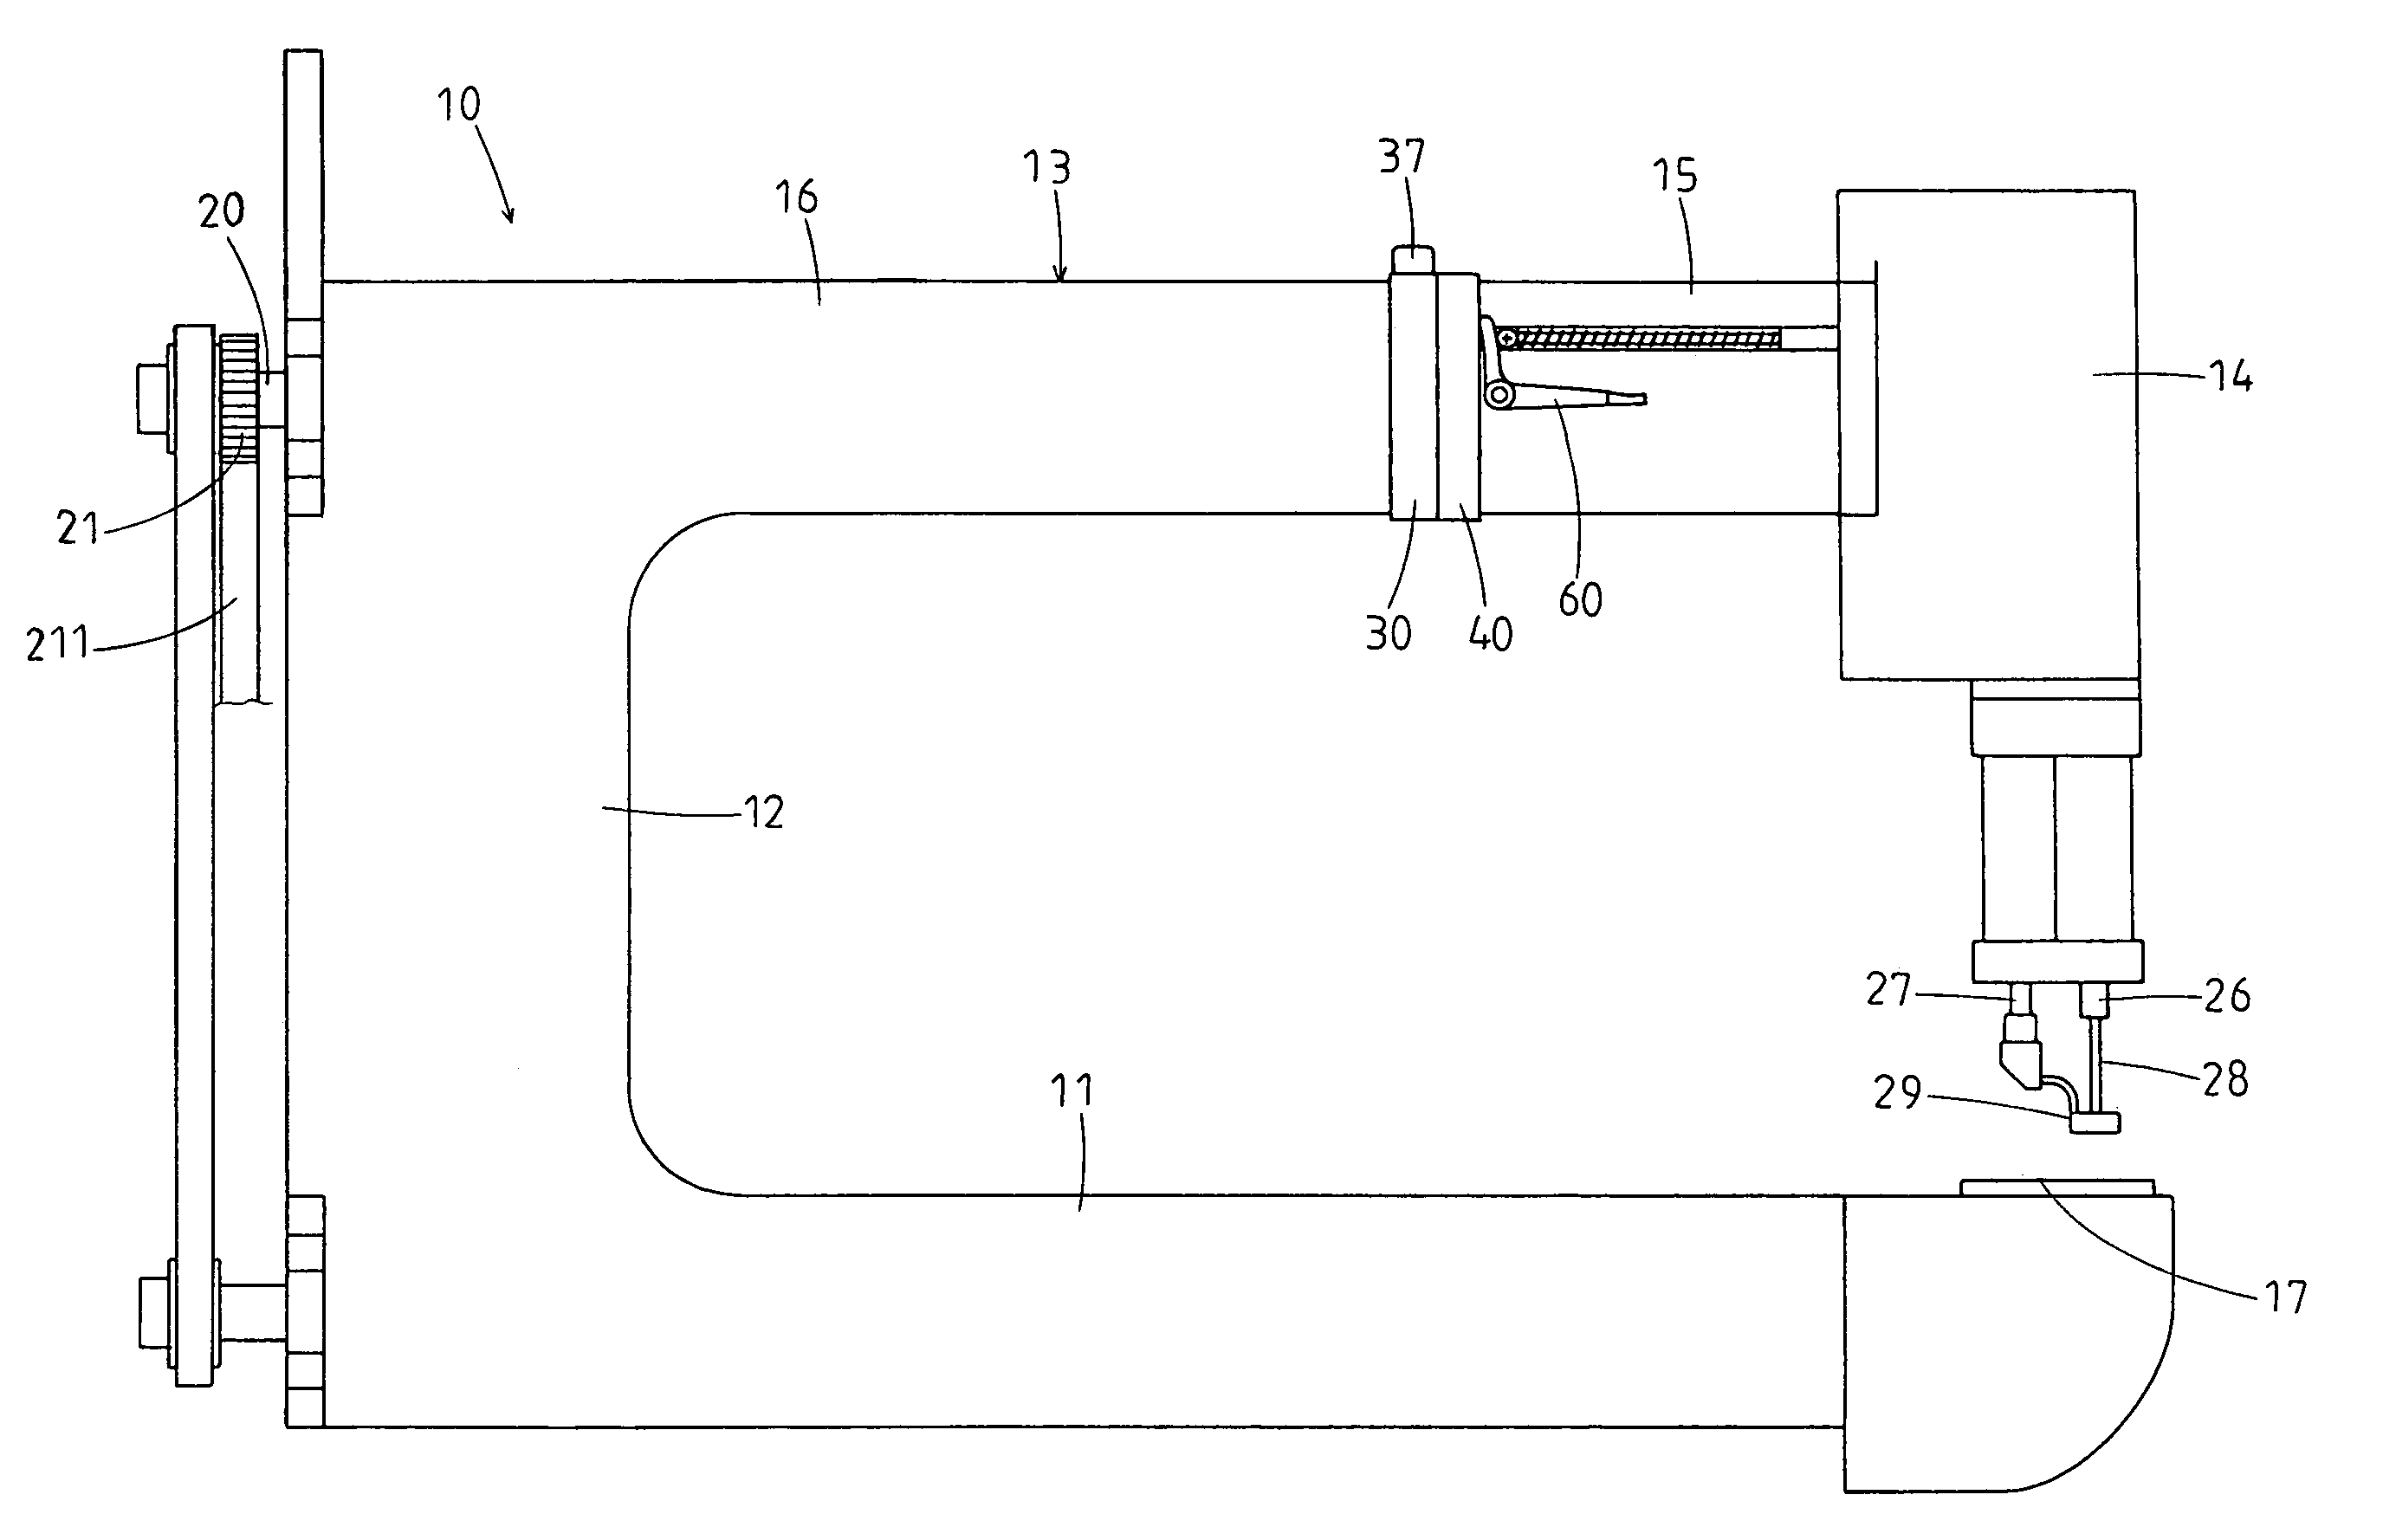 Adjustable positioning device for head of sewing machine